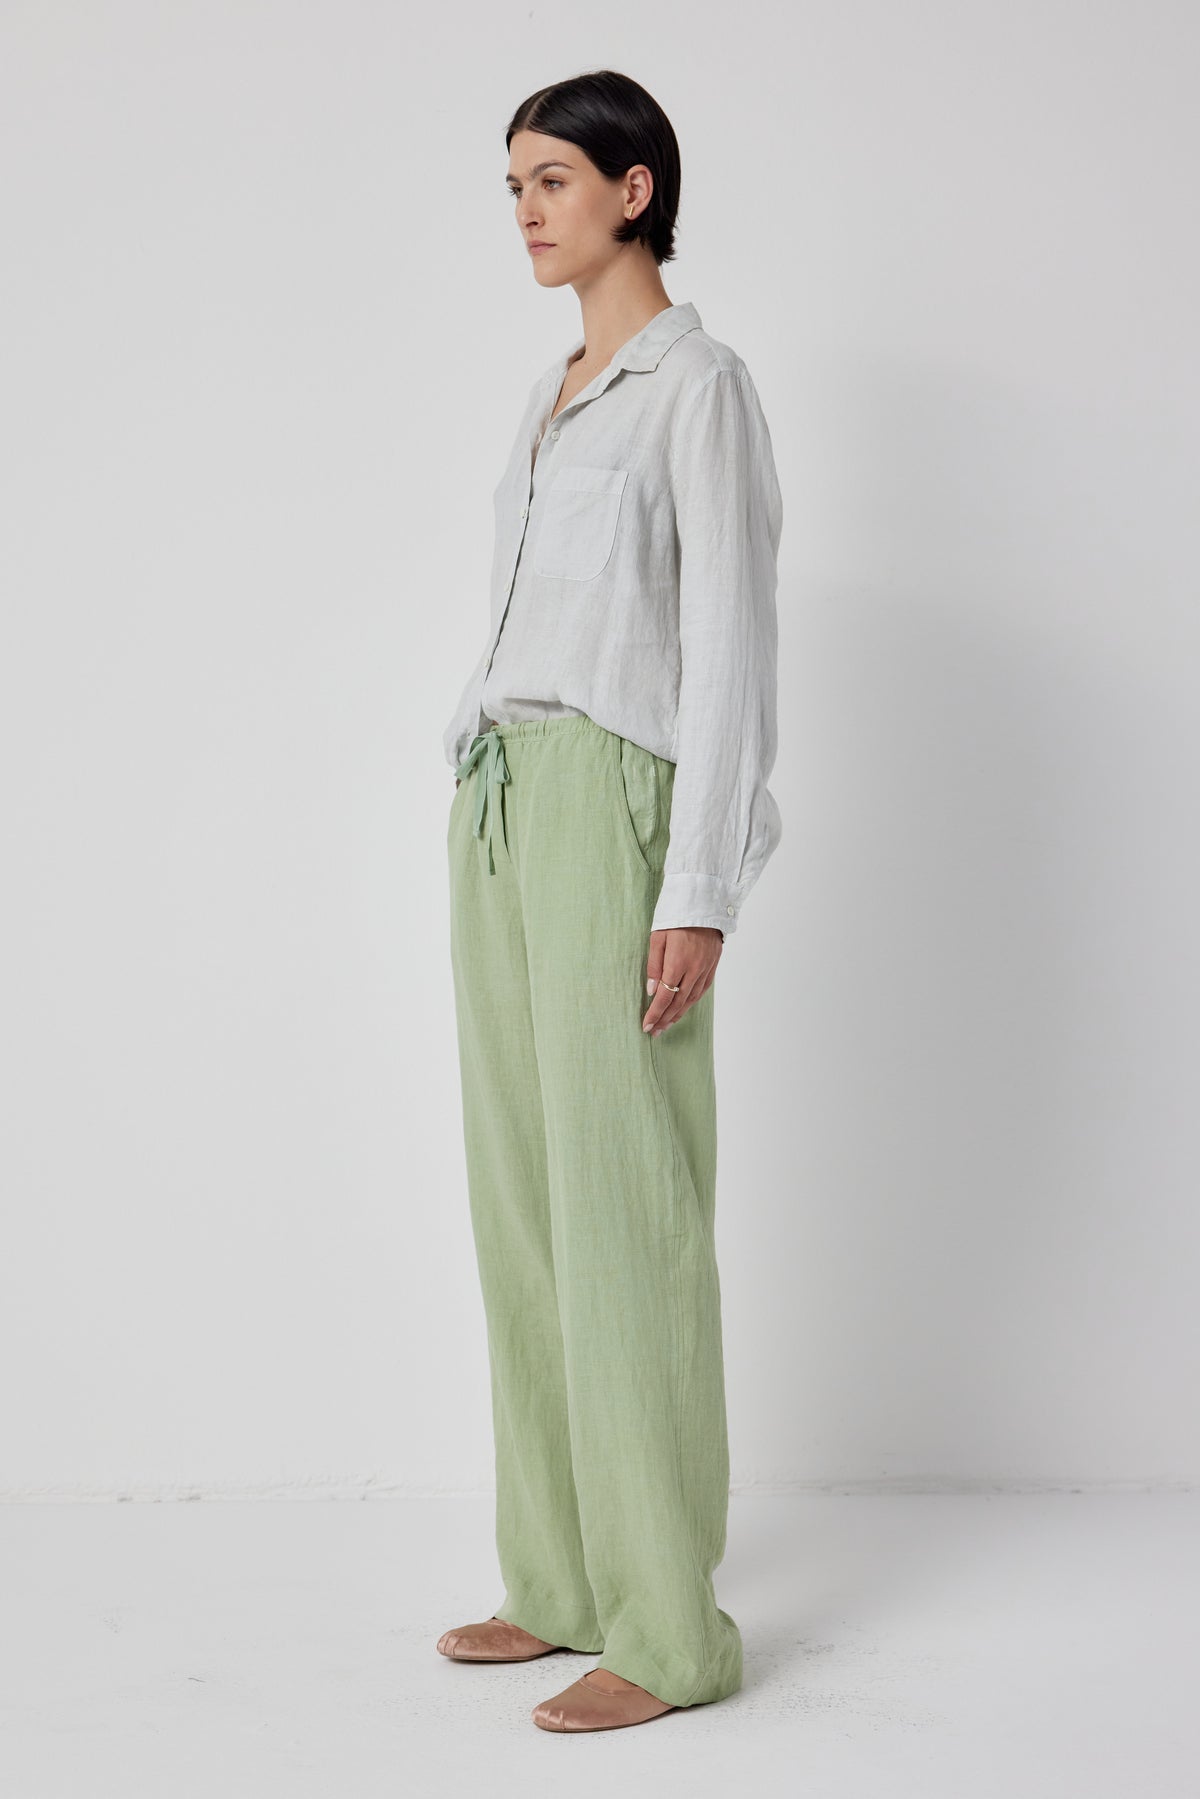   Woman standing in a studio, wearing a casual white shirt and light green Velvet by Jenny Graham Pico Linen Pant with an elastic waist, looking to the side, with a neutral expression. 